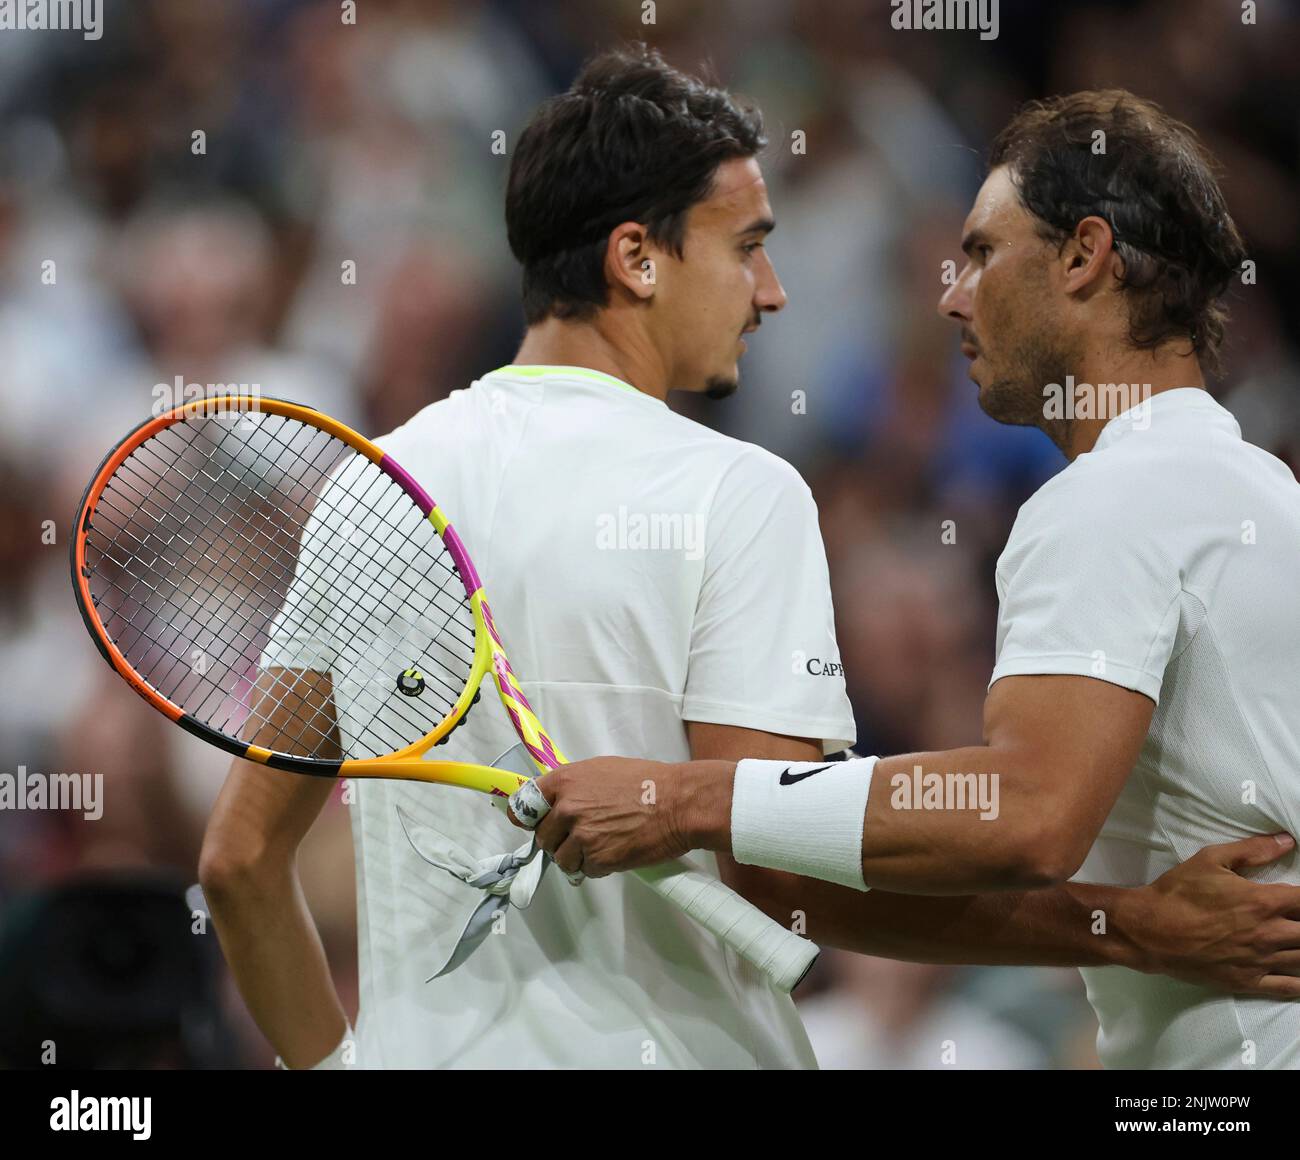 Rafael Nadal (R) of Spain defeats Lorenzo Sonego of Italy during the game of the gentlemens singles third-round match in the Championships, Wimbledon at All England Lawn Tennis and Croquet Club in